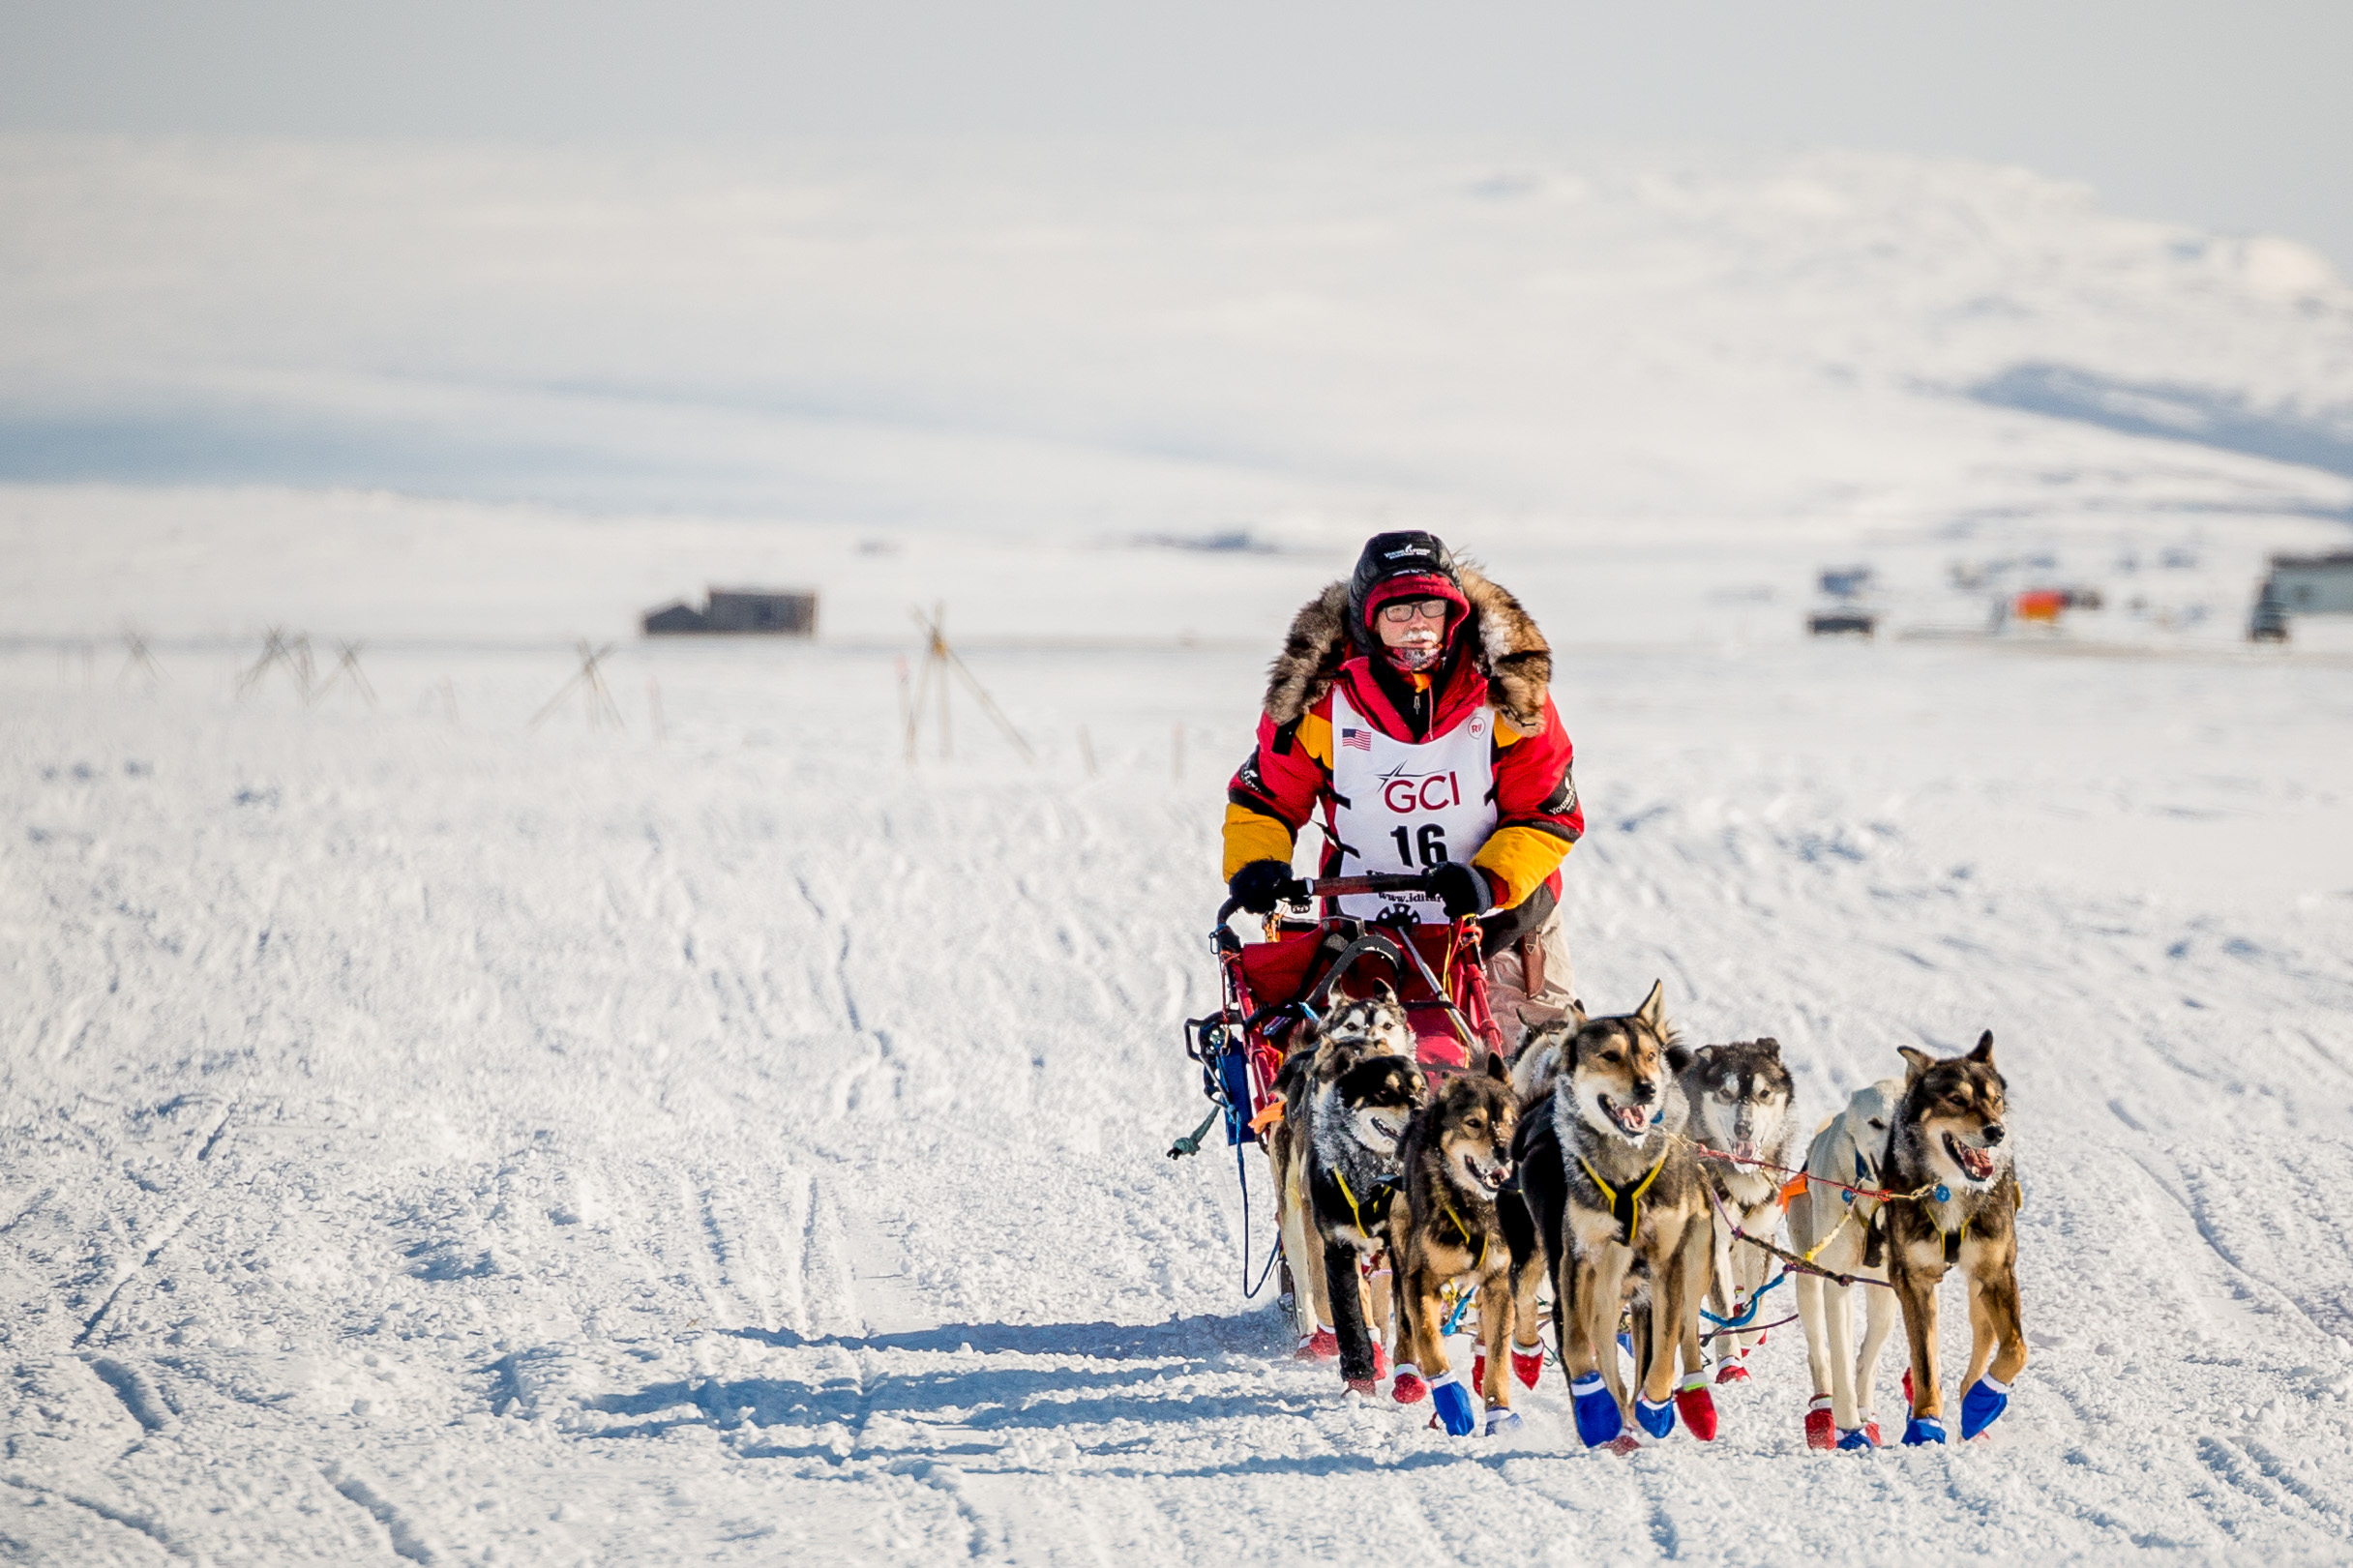 Mitch Seavey mushes on the outskirts of Nome on Tuesday afternoon. The elder Seavey finished the 2017 Iditarod in record time Tuesday, March 14, 2017. (Photo by David Dodman/ KNOM)